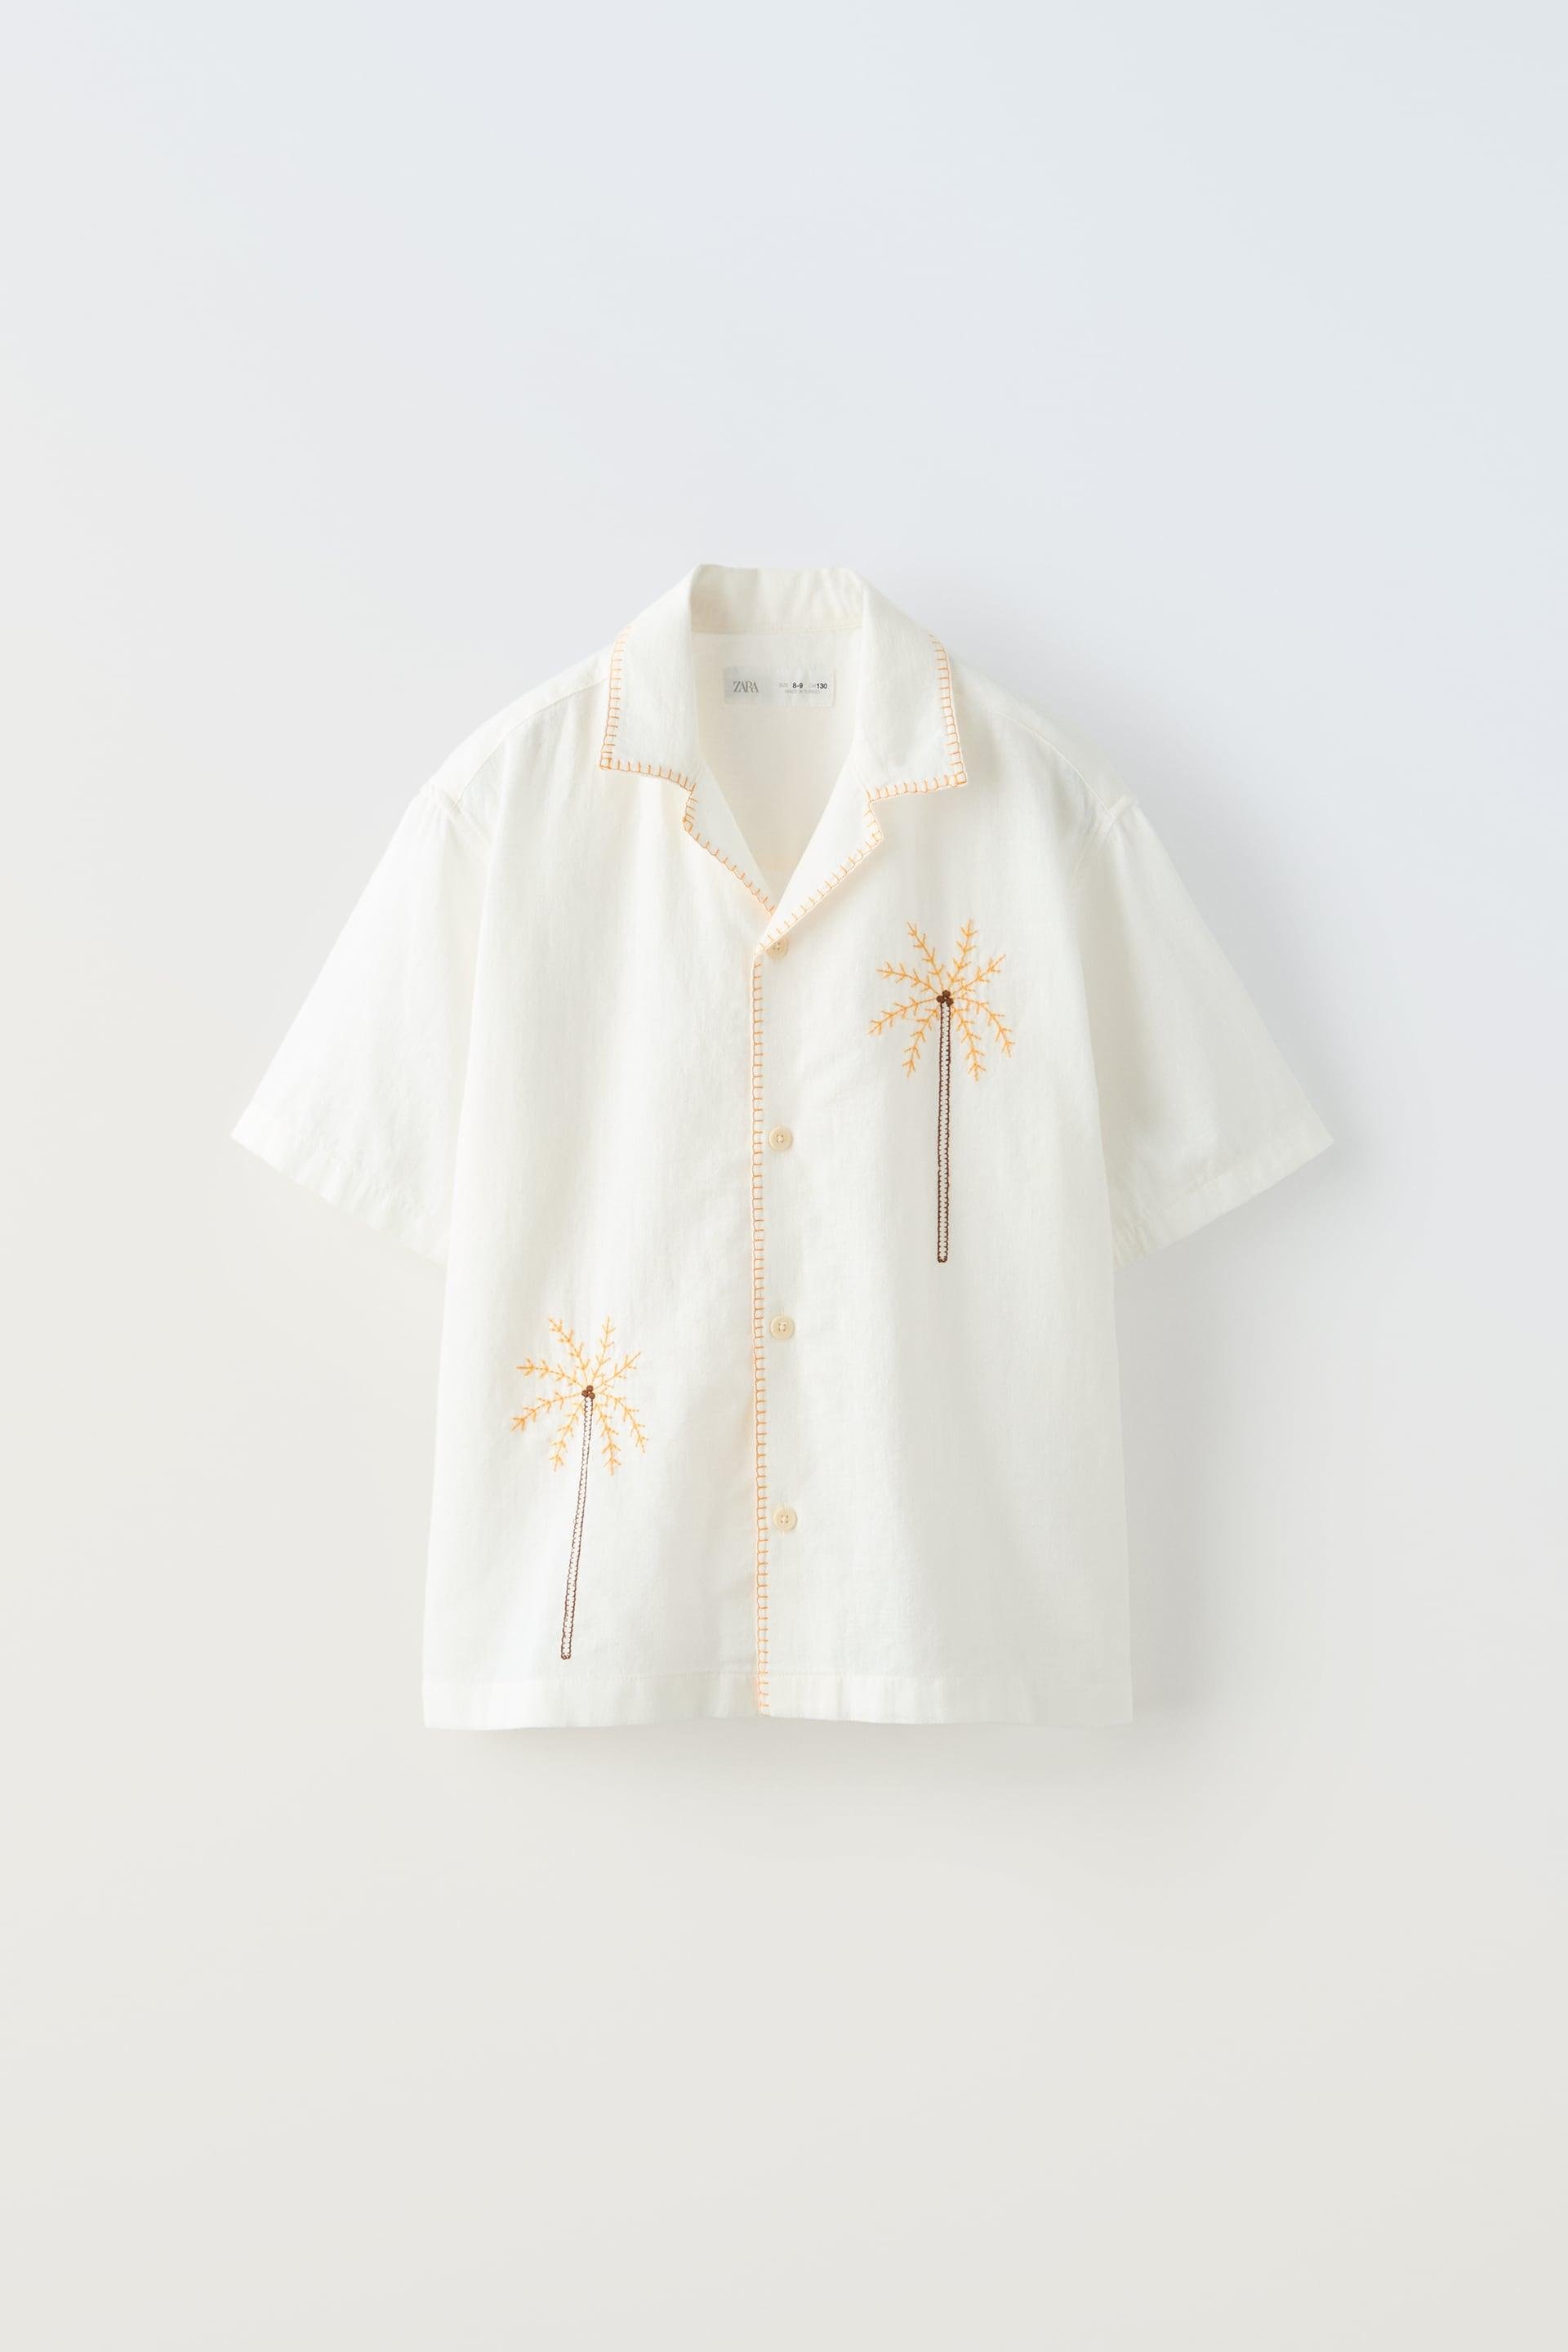 EMBROIDERED PALM TREE SHIRT by ZARA